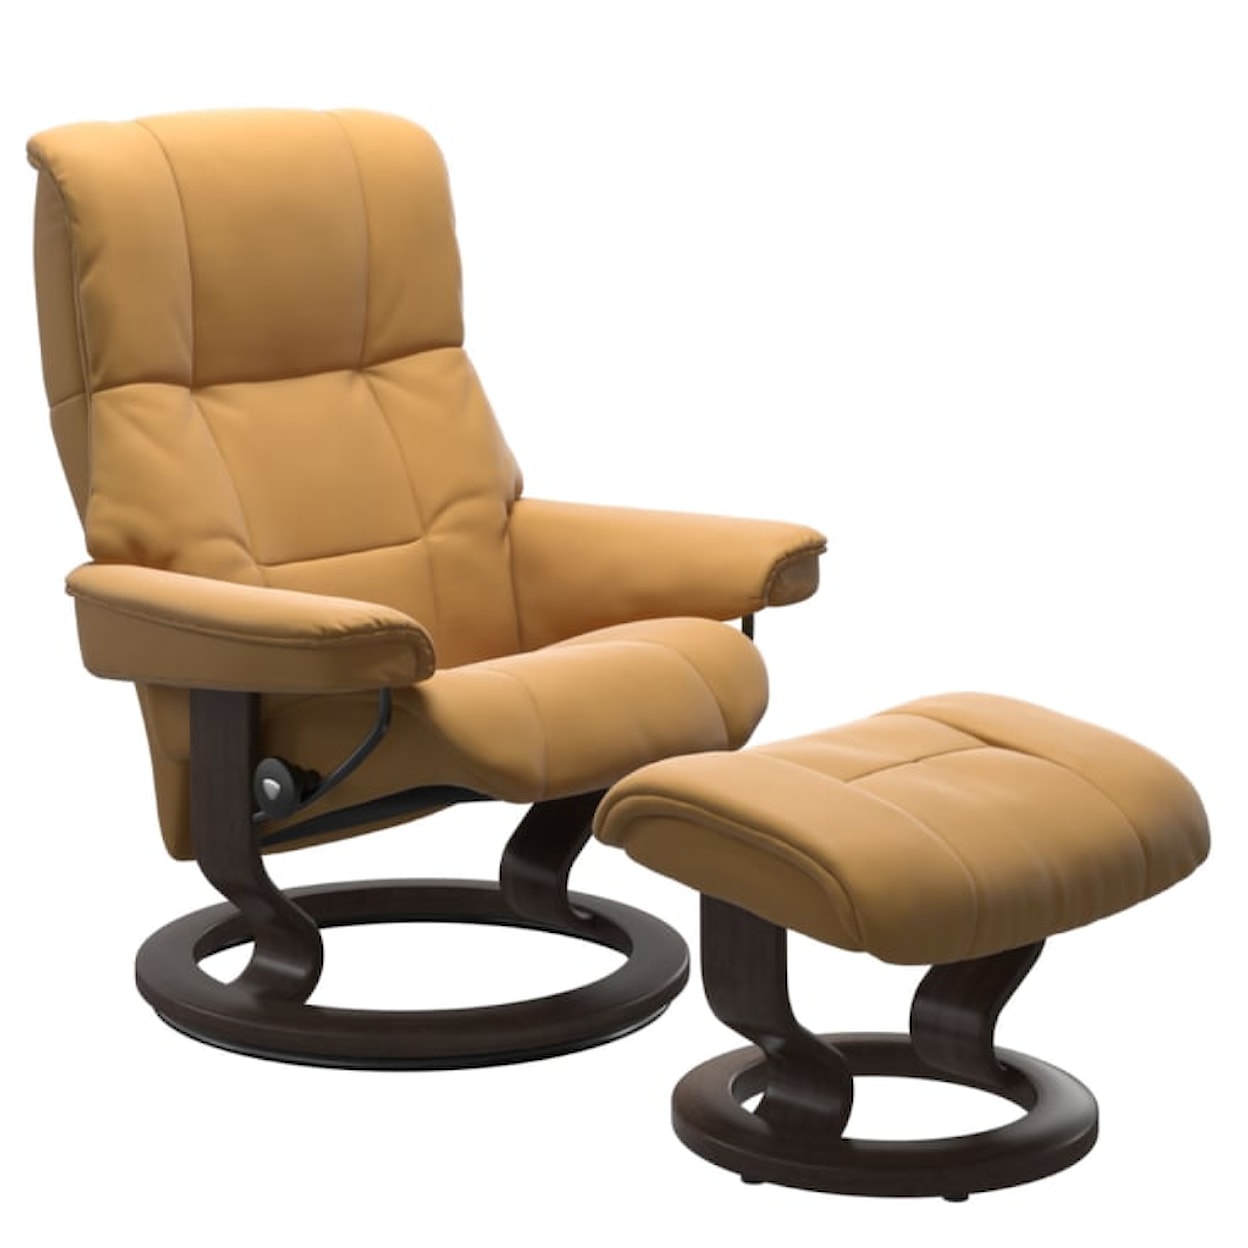 Stressless by Ekornes Mayfair Large Chair & Ottoman with Classic Base